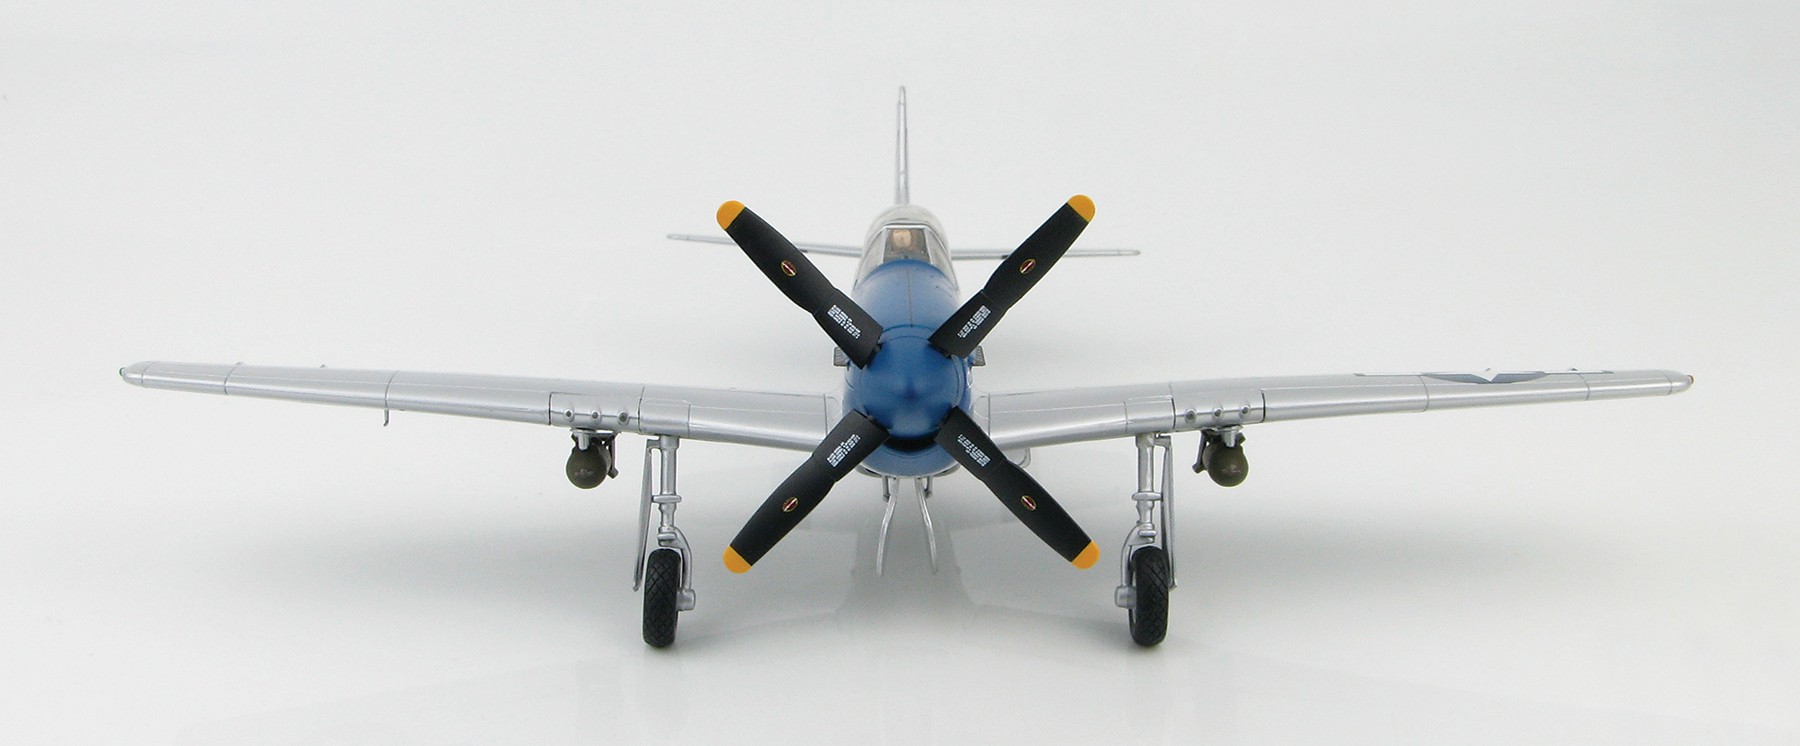 Hobby Master, Air Power Series, P-51D Mustang “Moonbeam McSwine” Capt. W.  Whisner 1944, HA7726 Item: HA7726 1:48 Scale ezToys - Diecast Models and  Collectibles